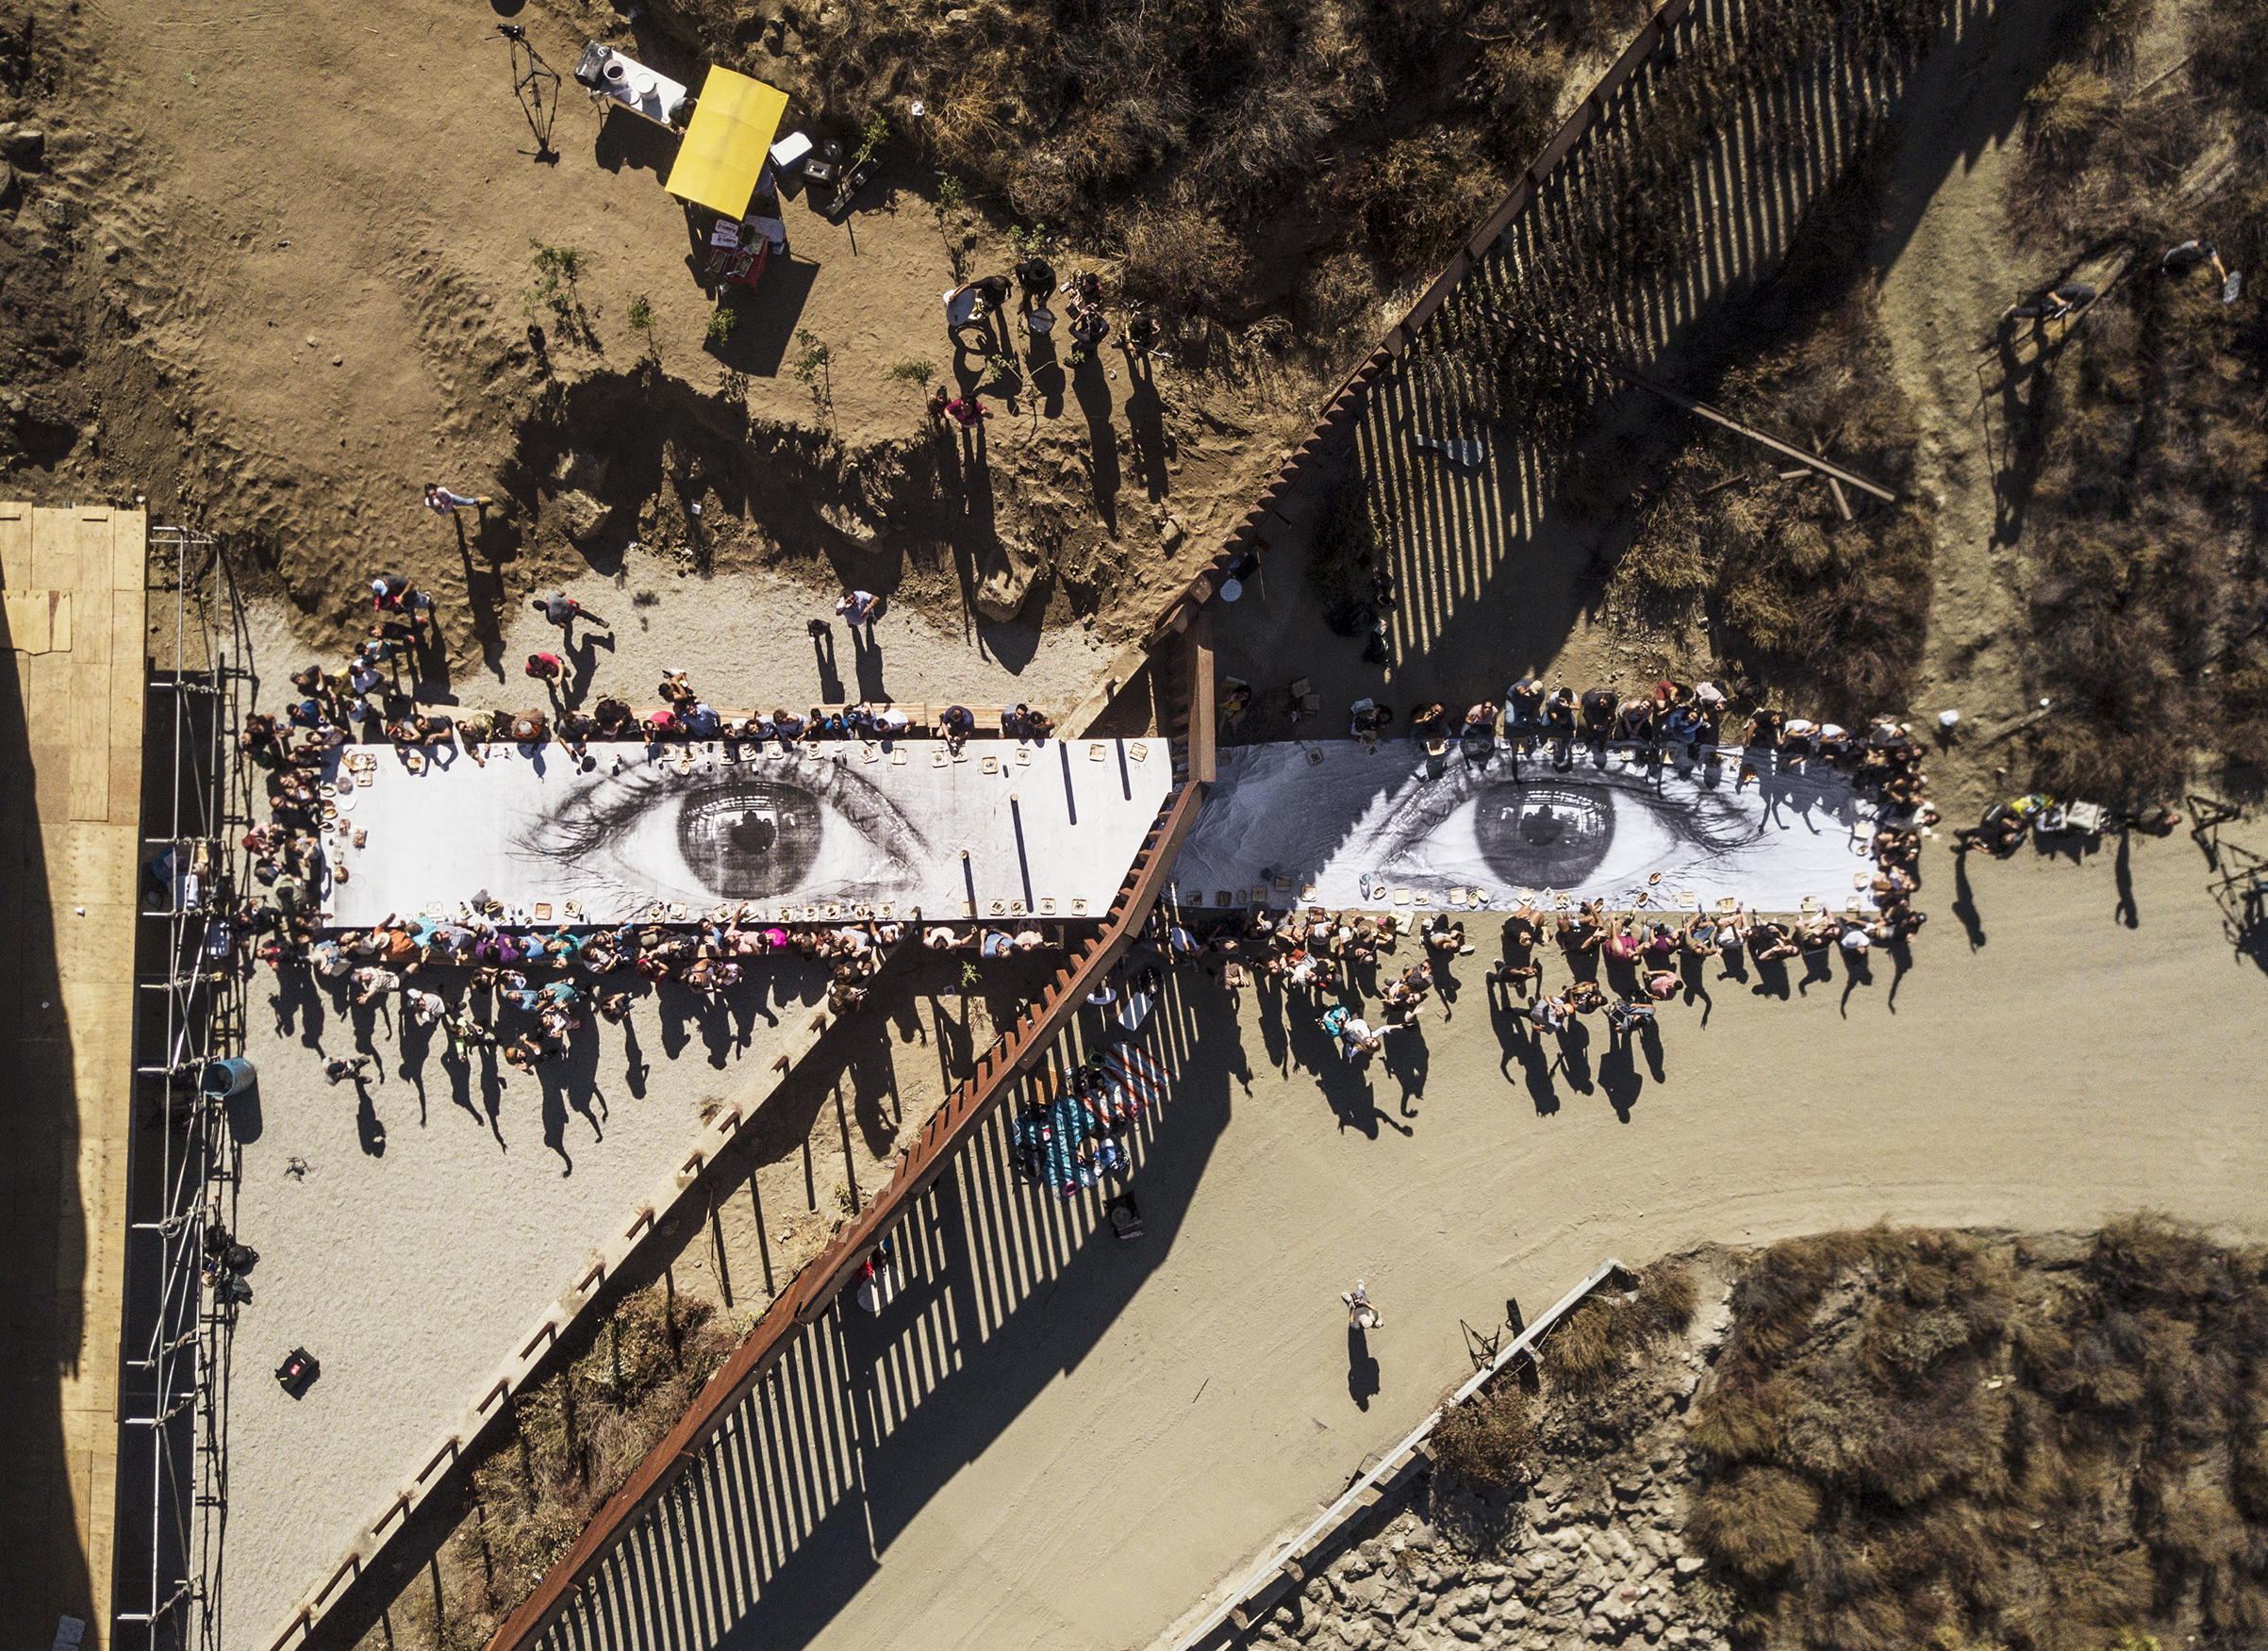 A picnic takes place on JR’s Giant Picnic, a photograph of the eyes of a Dreamer at the U.S.-Mexico border in Tecate, Mexico, on Oct. 8 (JR-art.net)